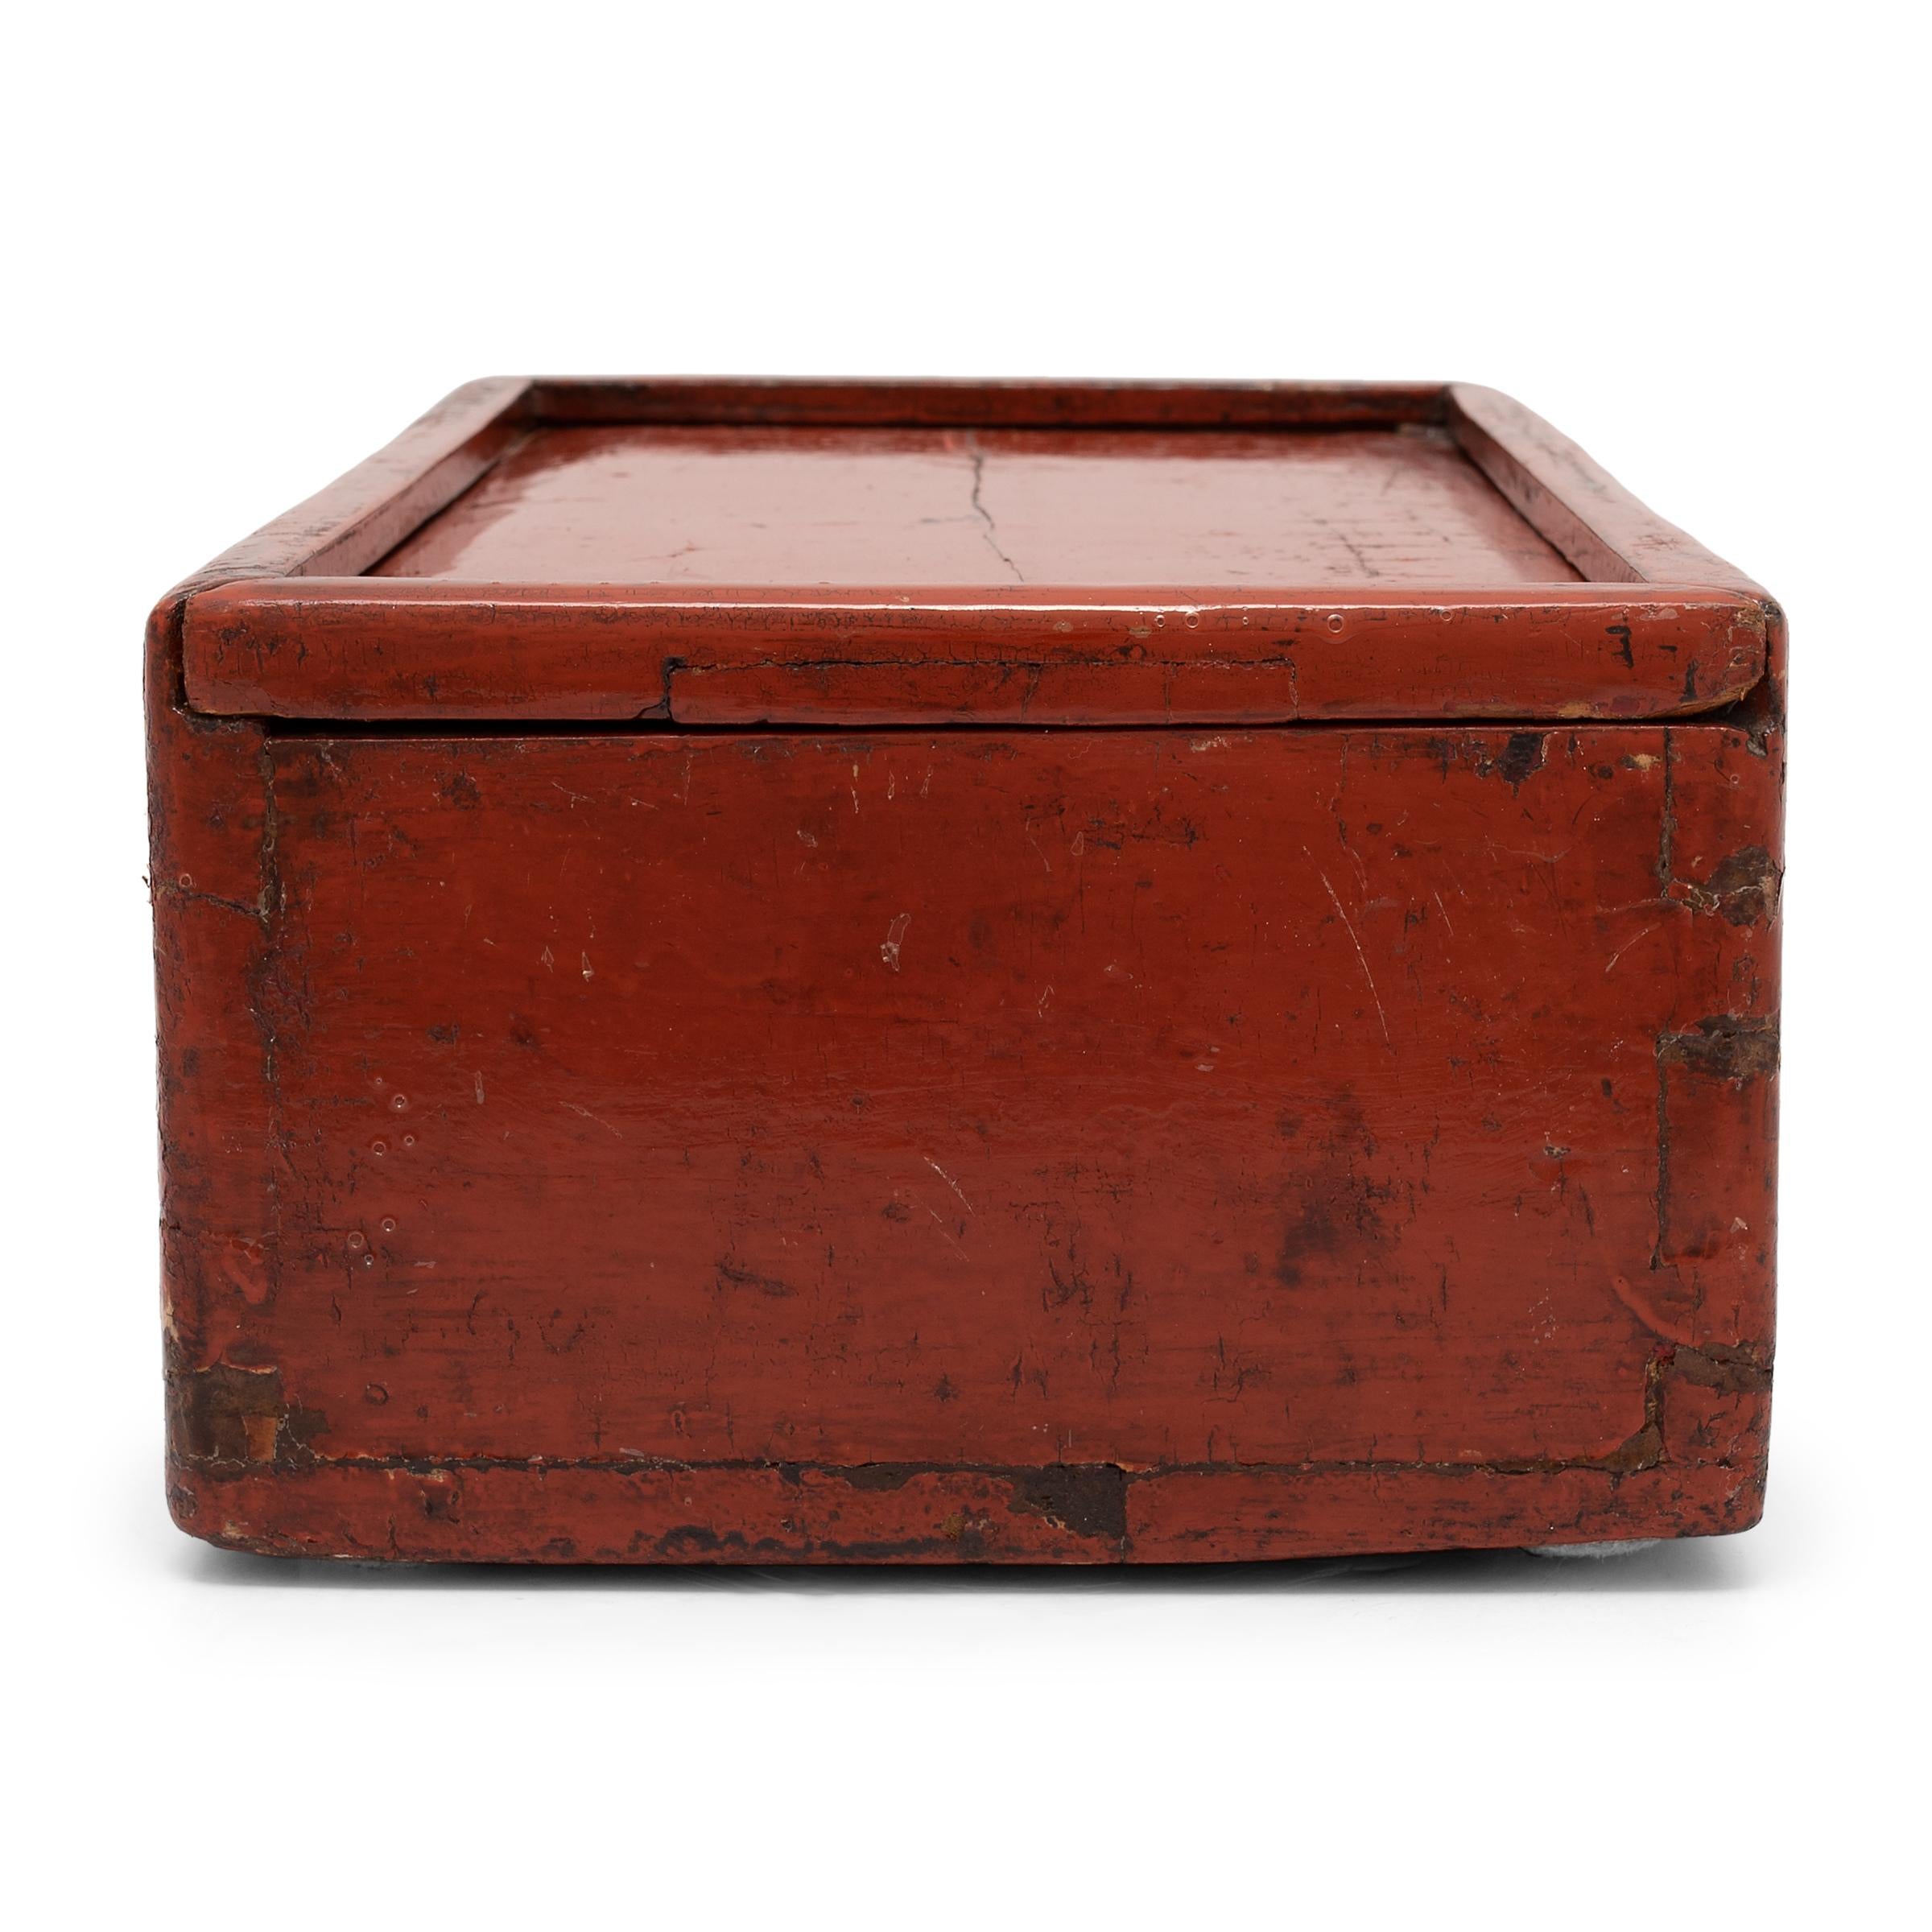 Wood Chinese Painted Orange Lacquer Box, c. 1850